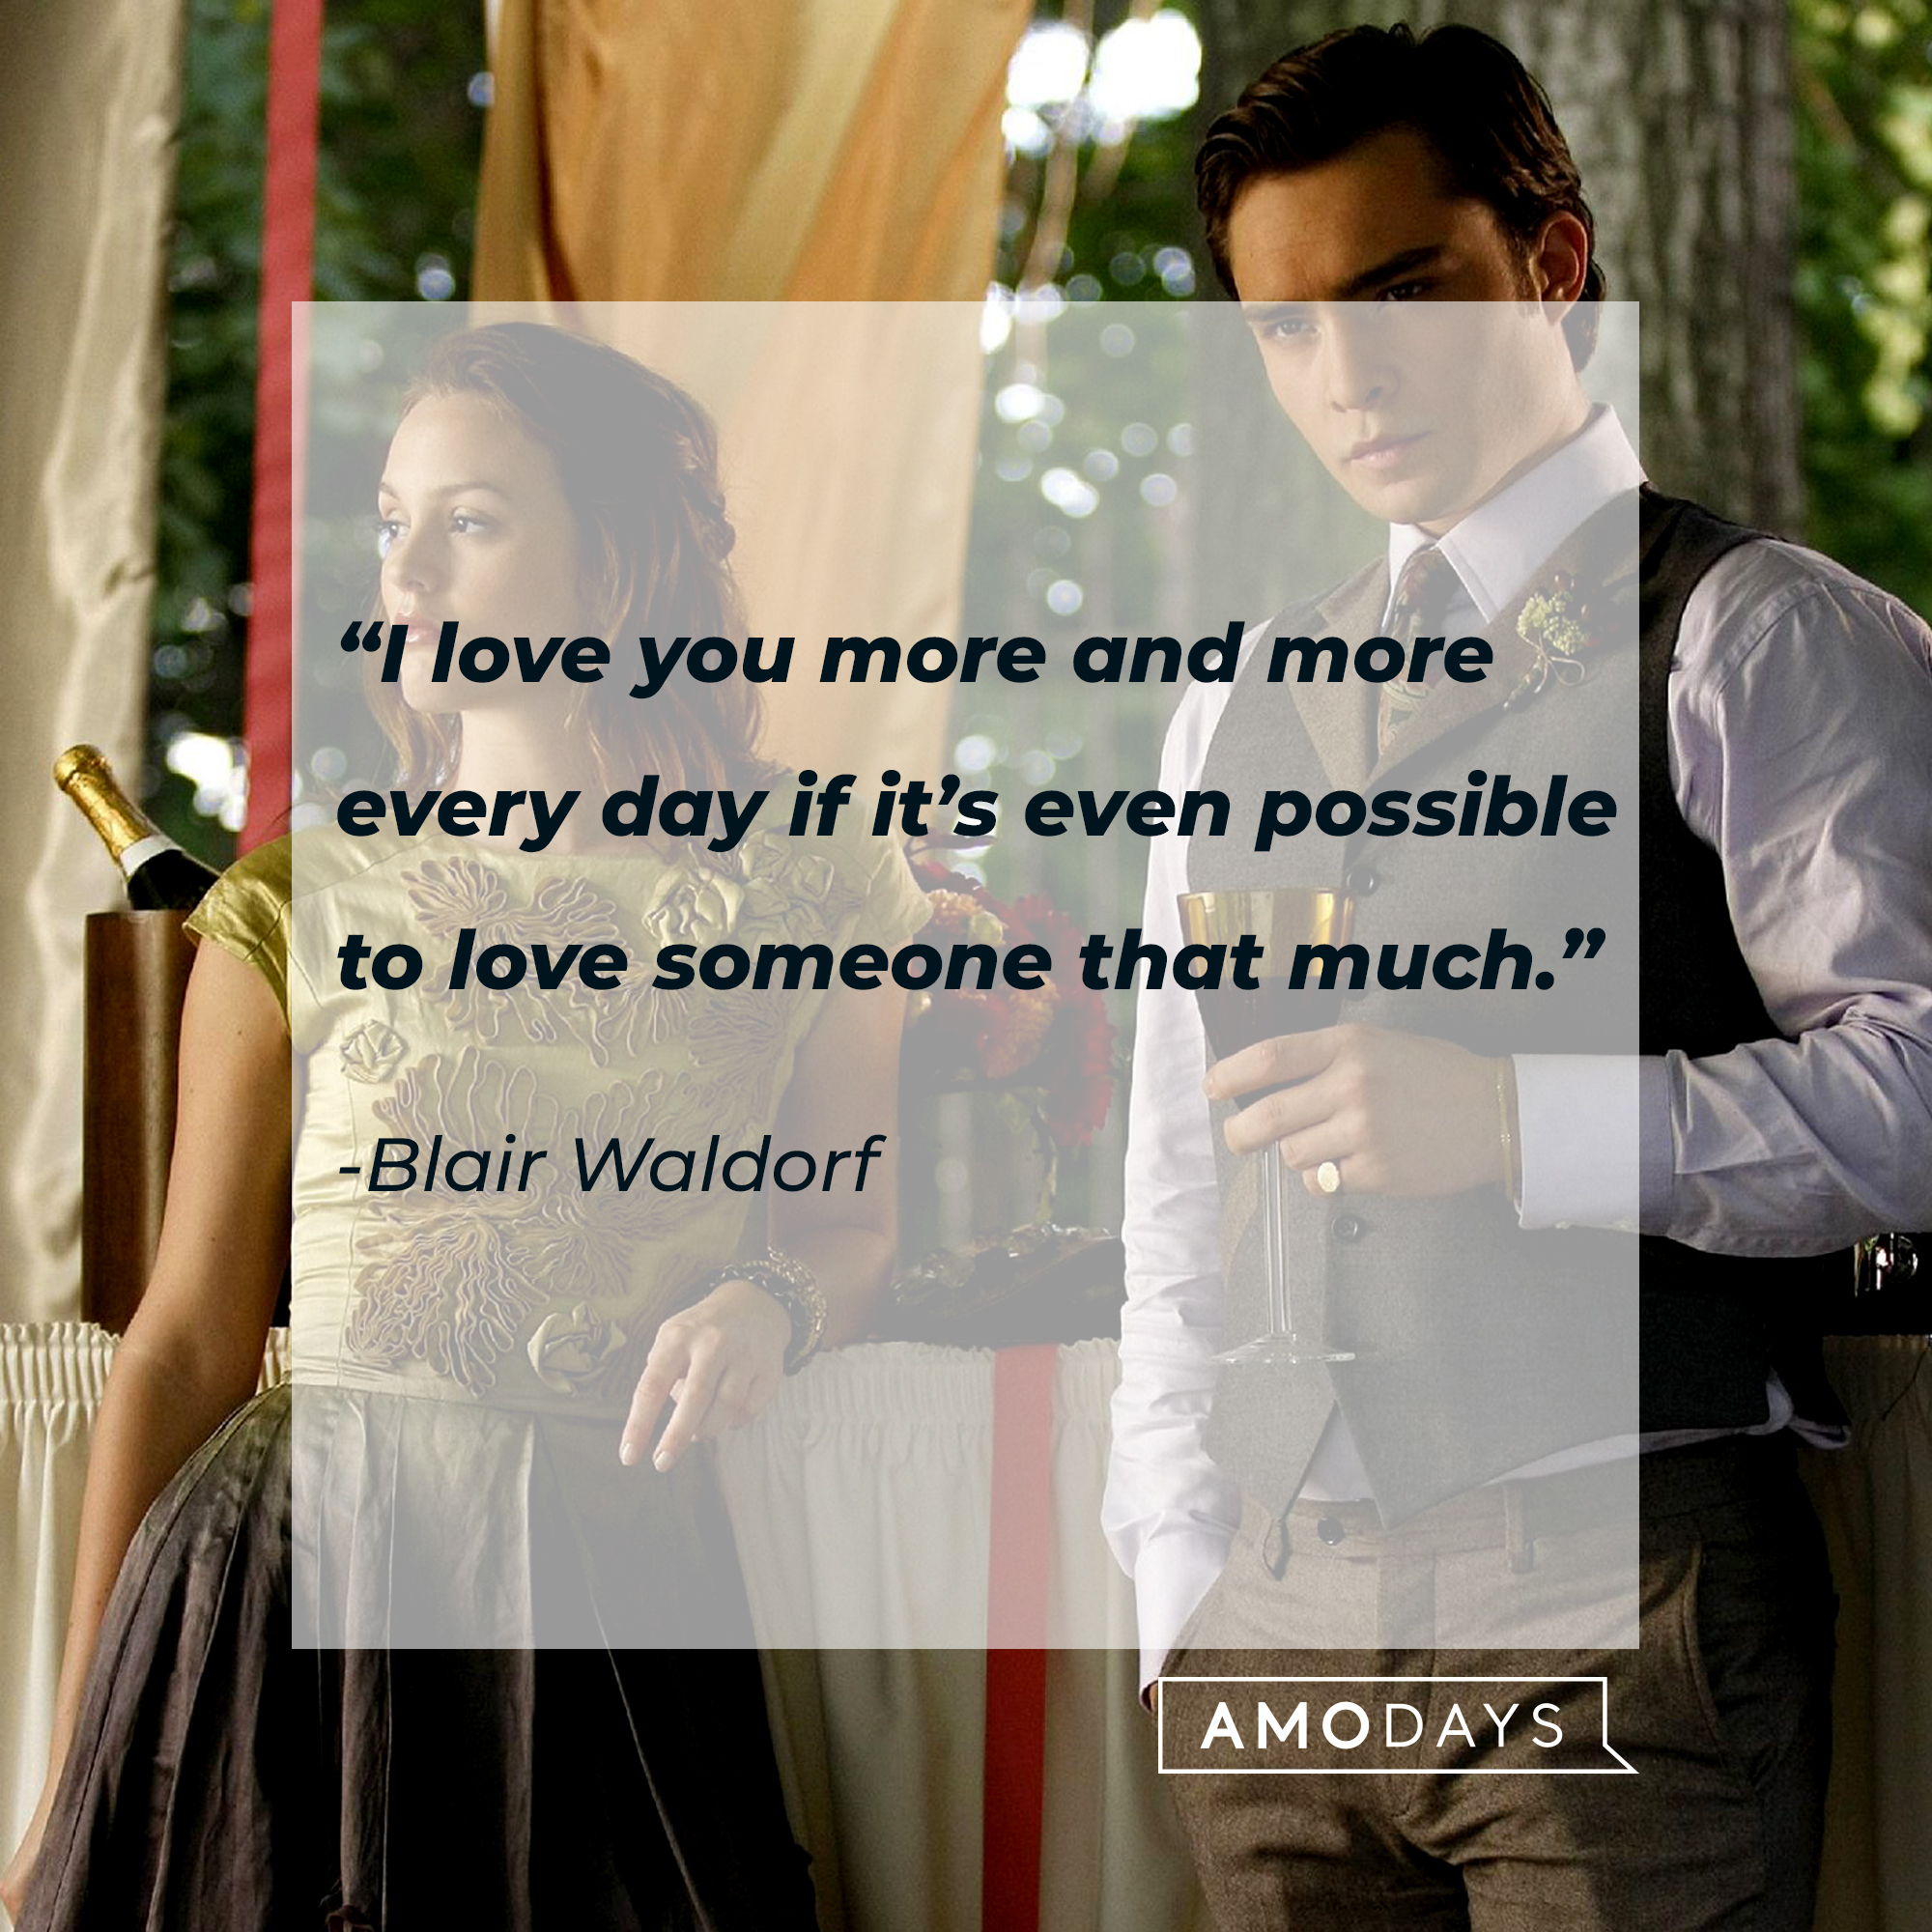 Blair Waldorf and Chuck Bass from "Gossip Girl" with her quote: “I love you more and more every day if it’s even possible to love someone that much.” | Source: Facebook.com/GossipGirl